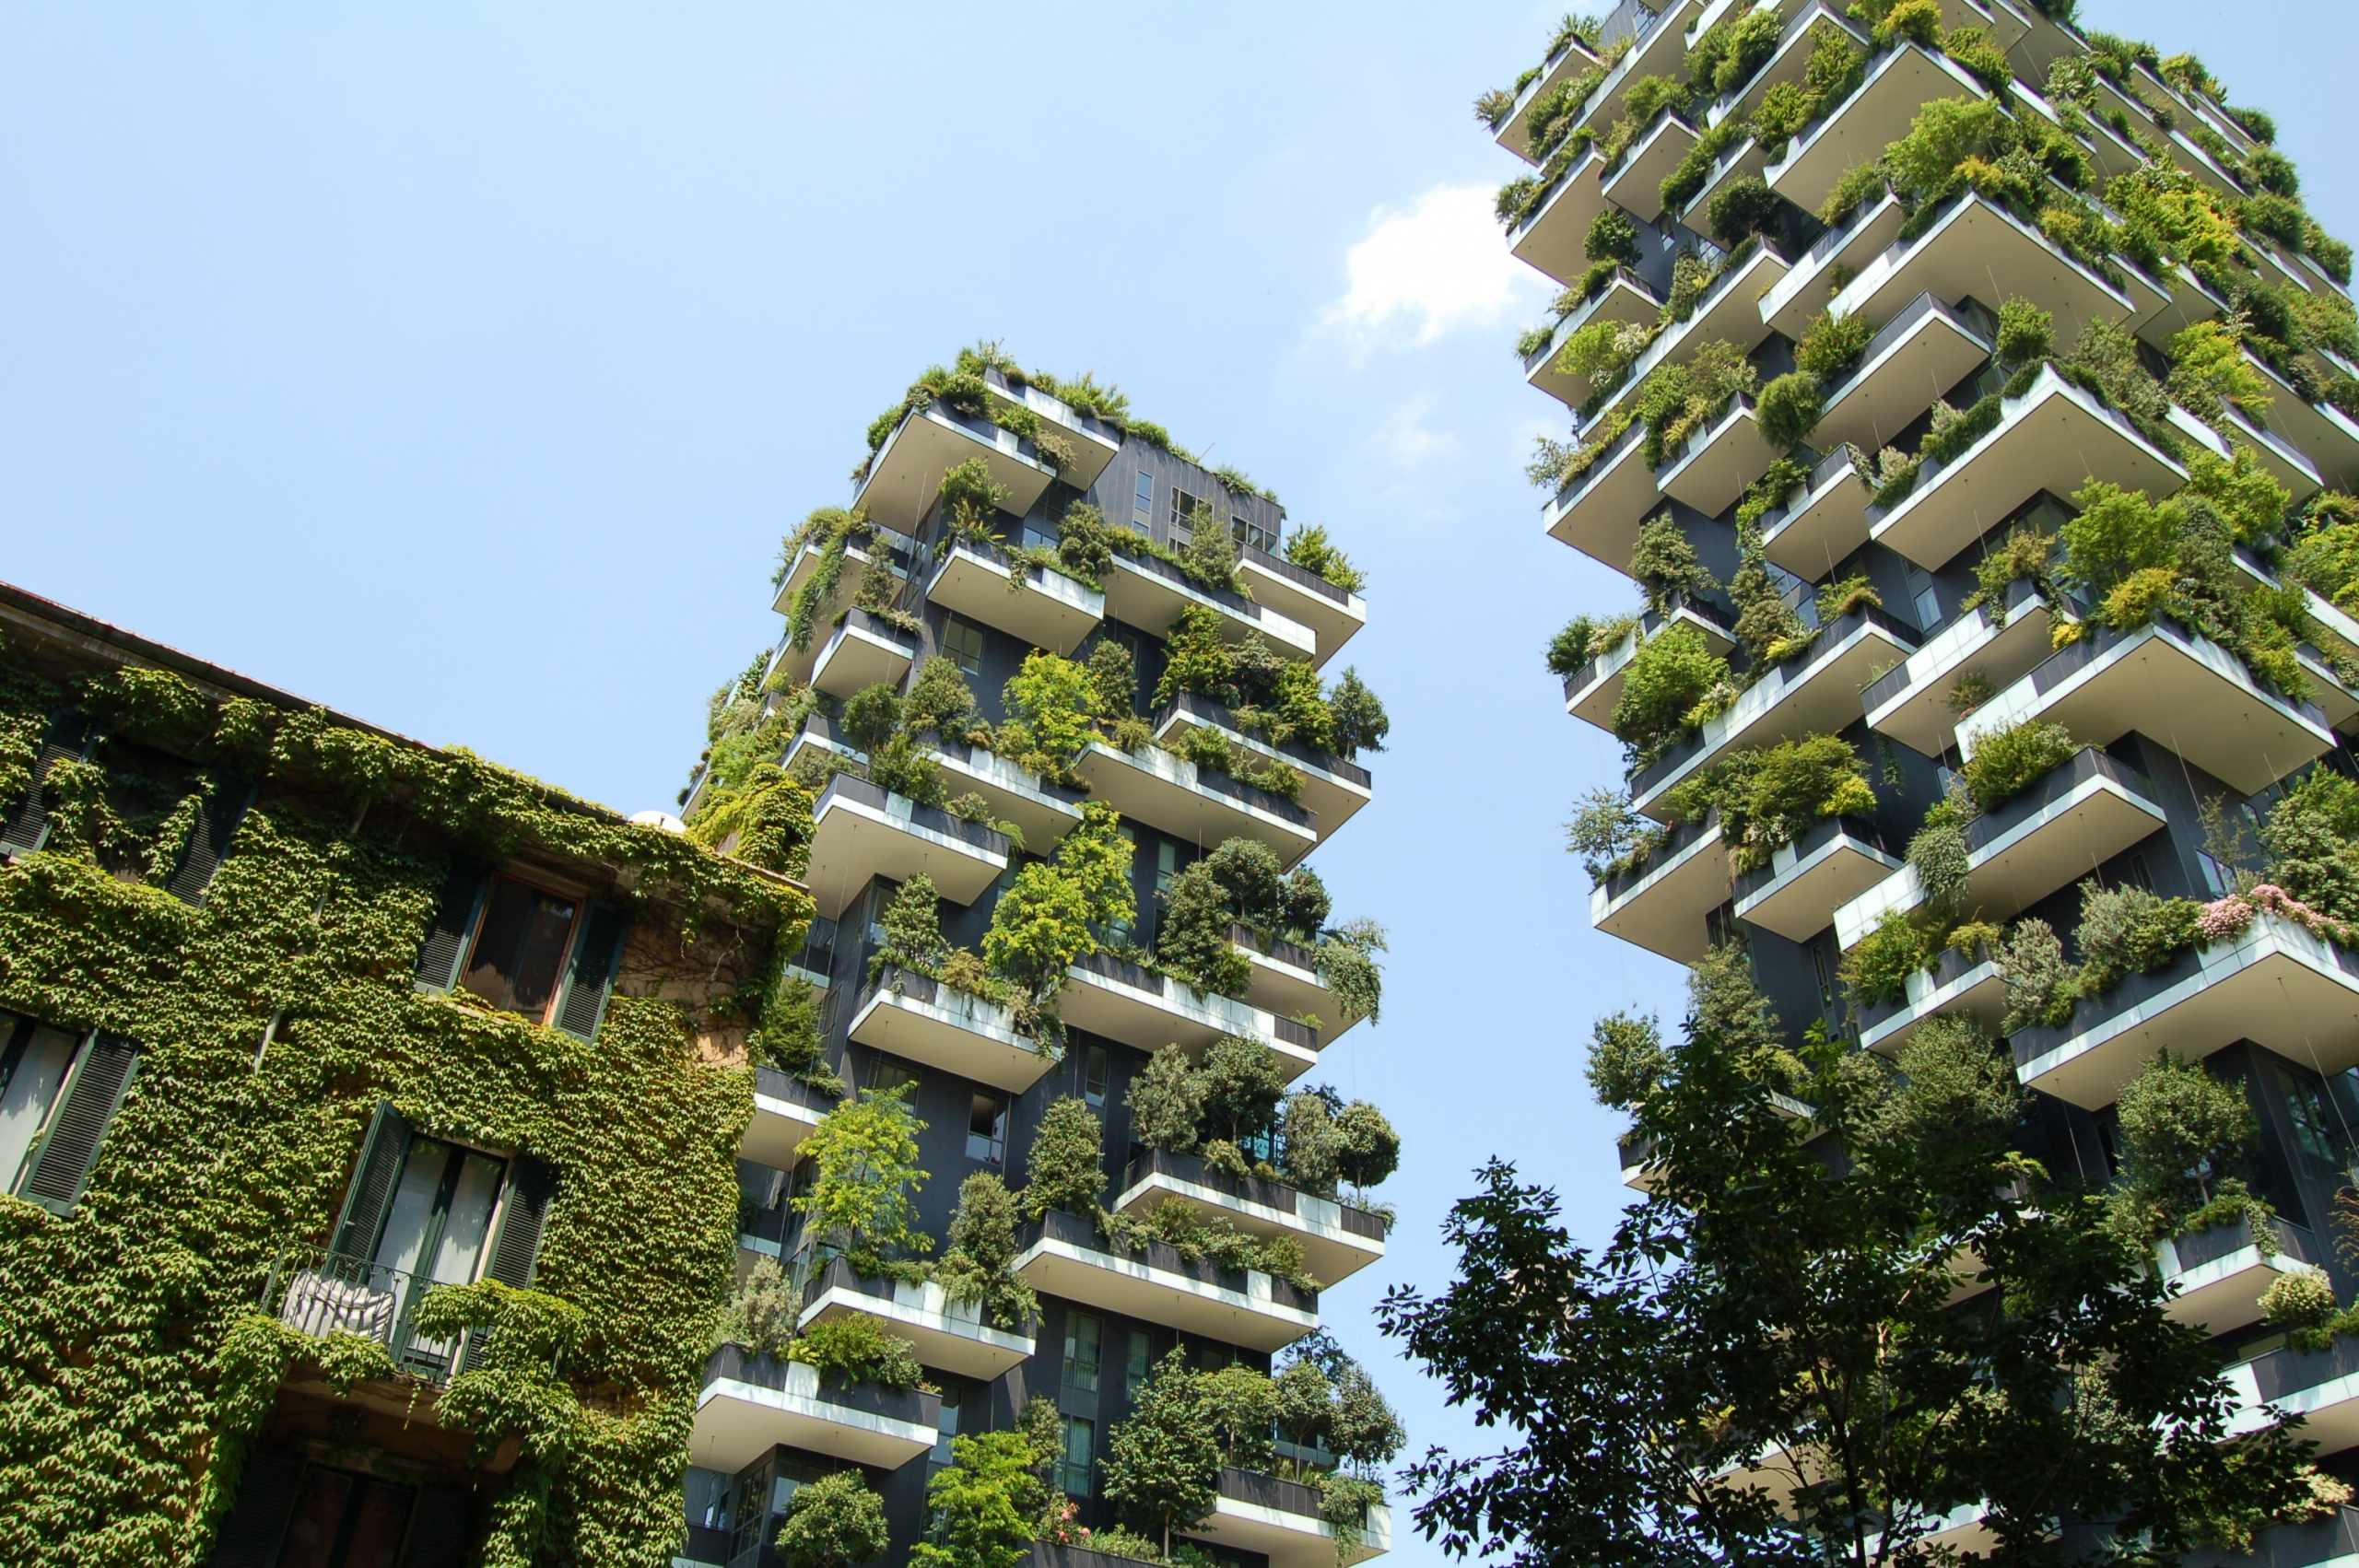 Green cities: urban infrastructures to effectively respond to climate change